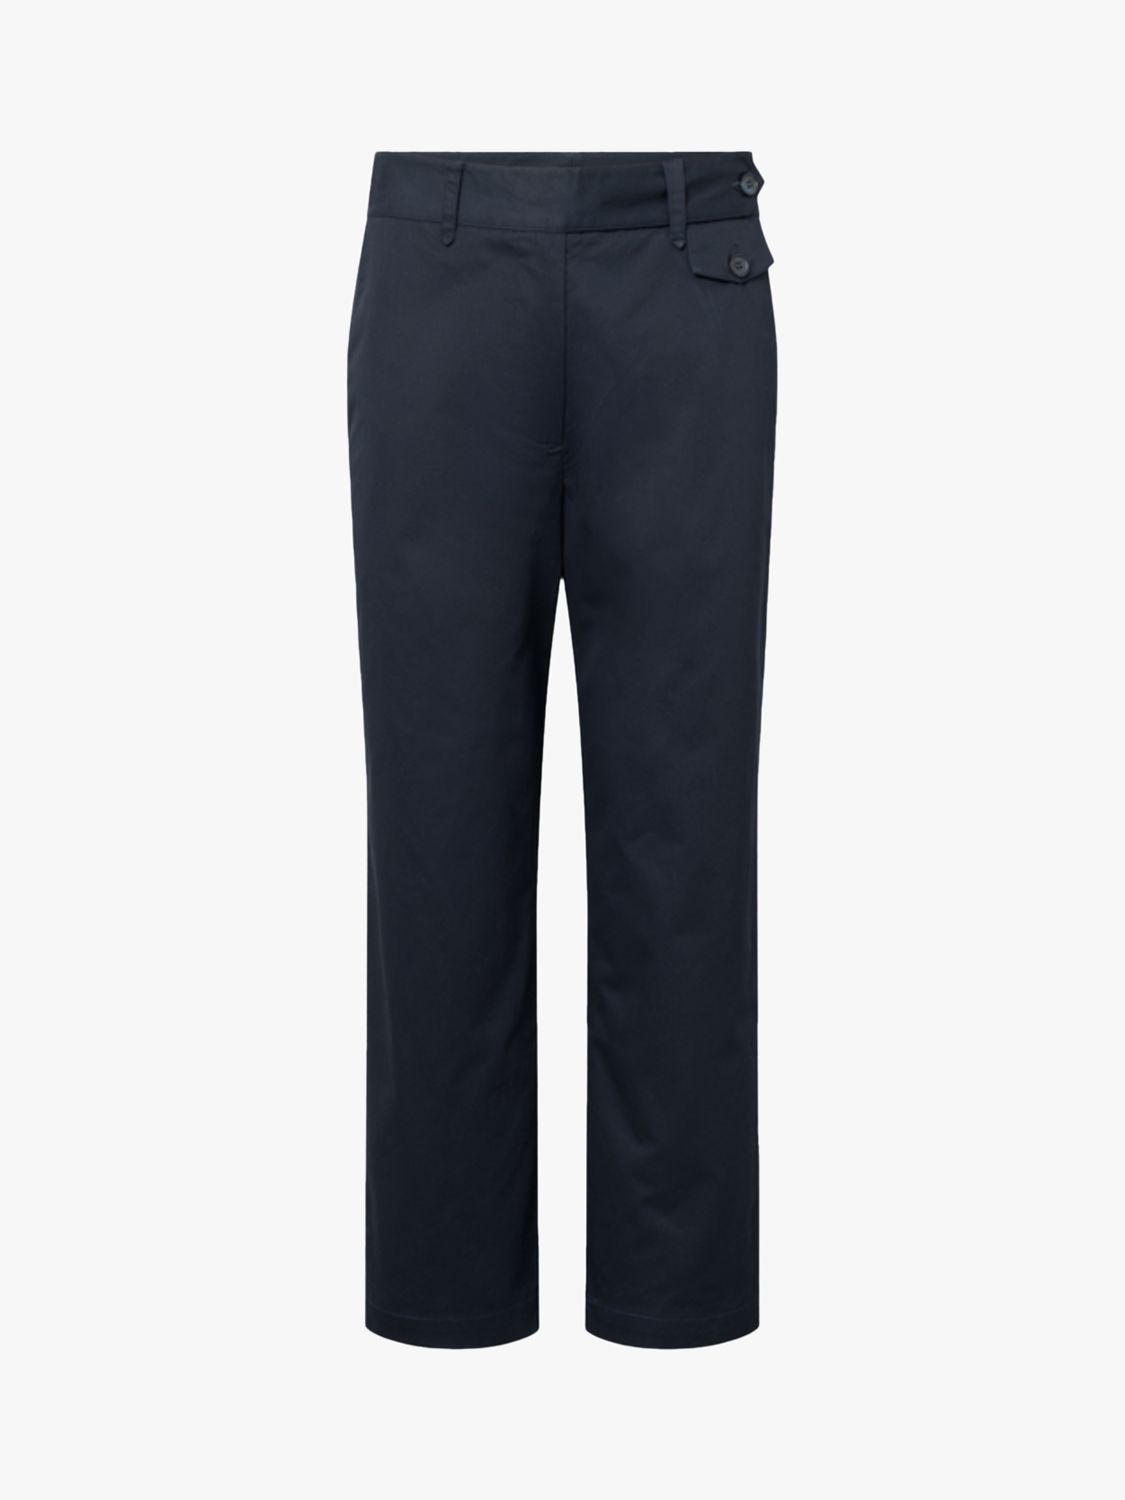 Buy Lovechild 1979 Coppola Low Waisted Cotton Trousers Online at johnlewis.com